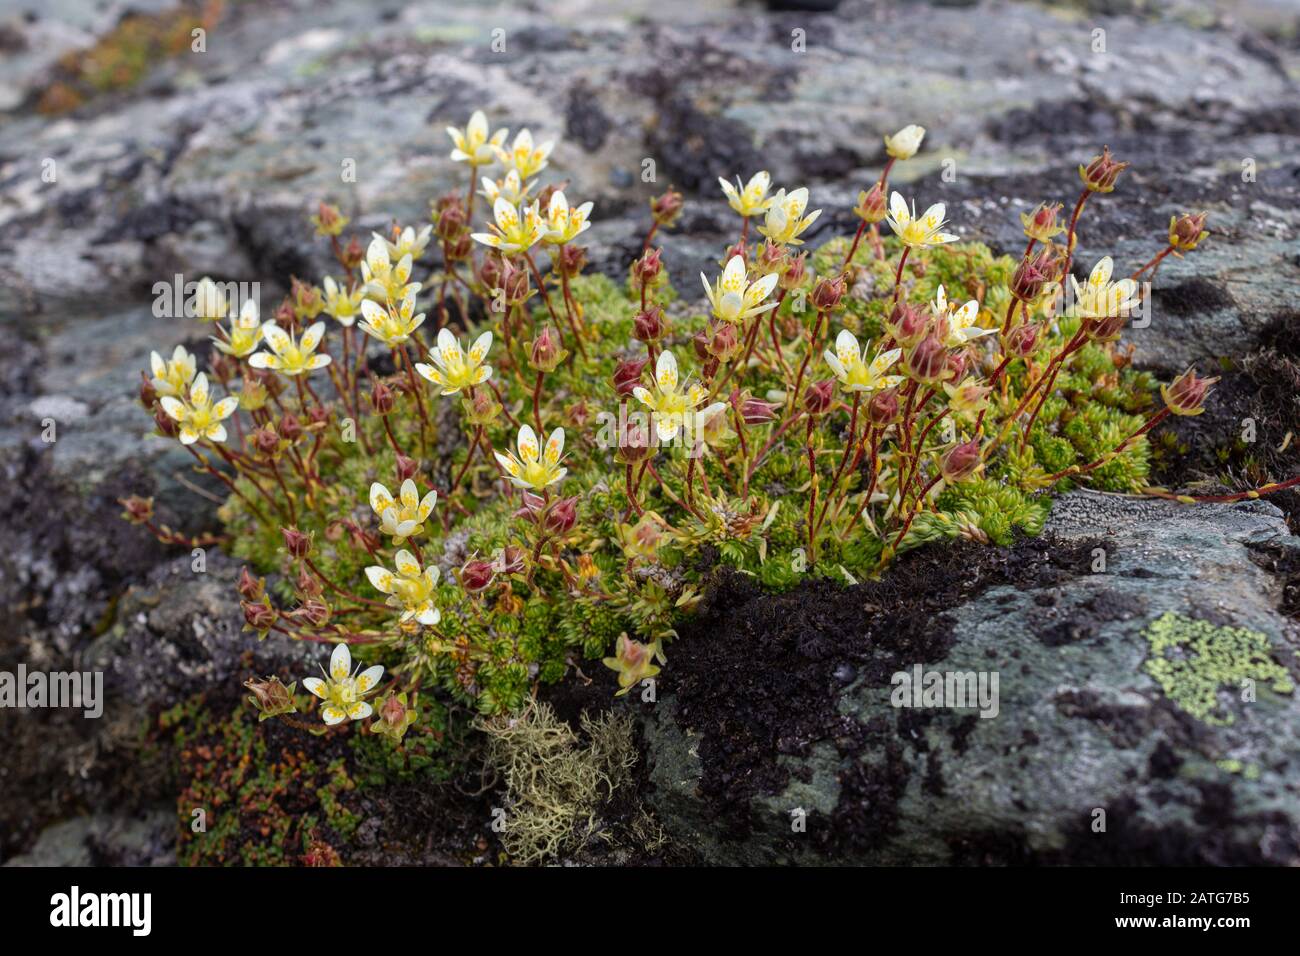 Alpine flower Saxifraga Bryoides (mossy saxifrage) on rock. Low perspective. Aosta valley, Italy. Stock Photo